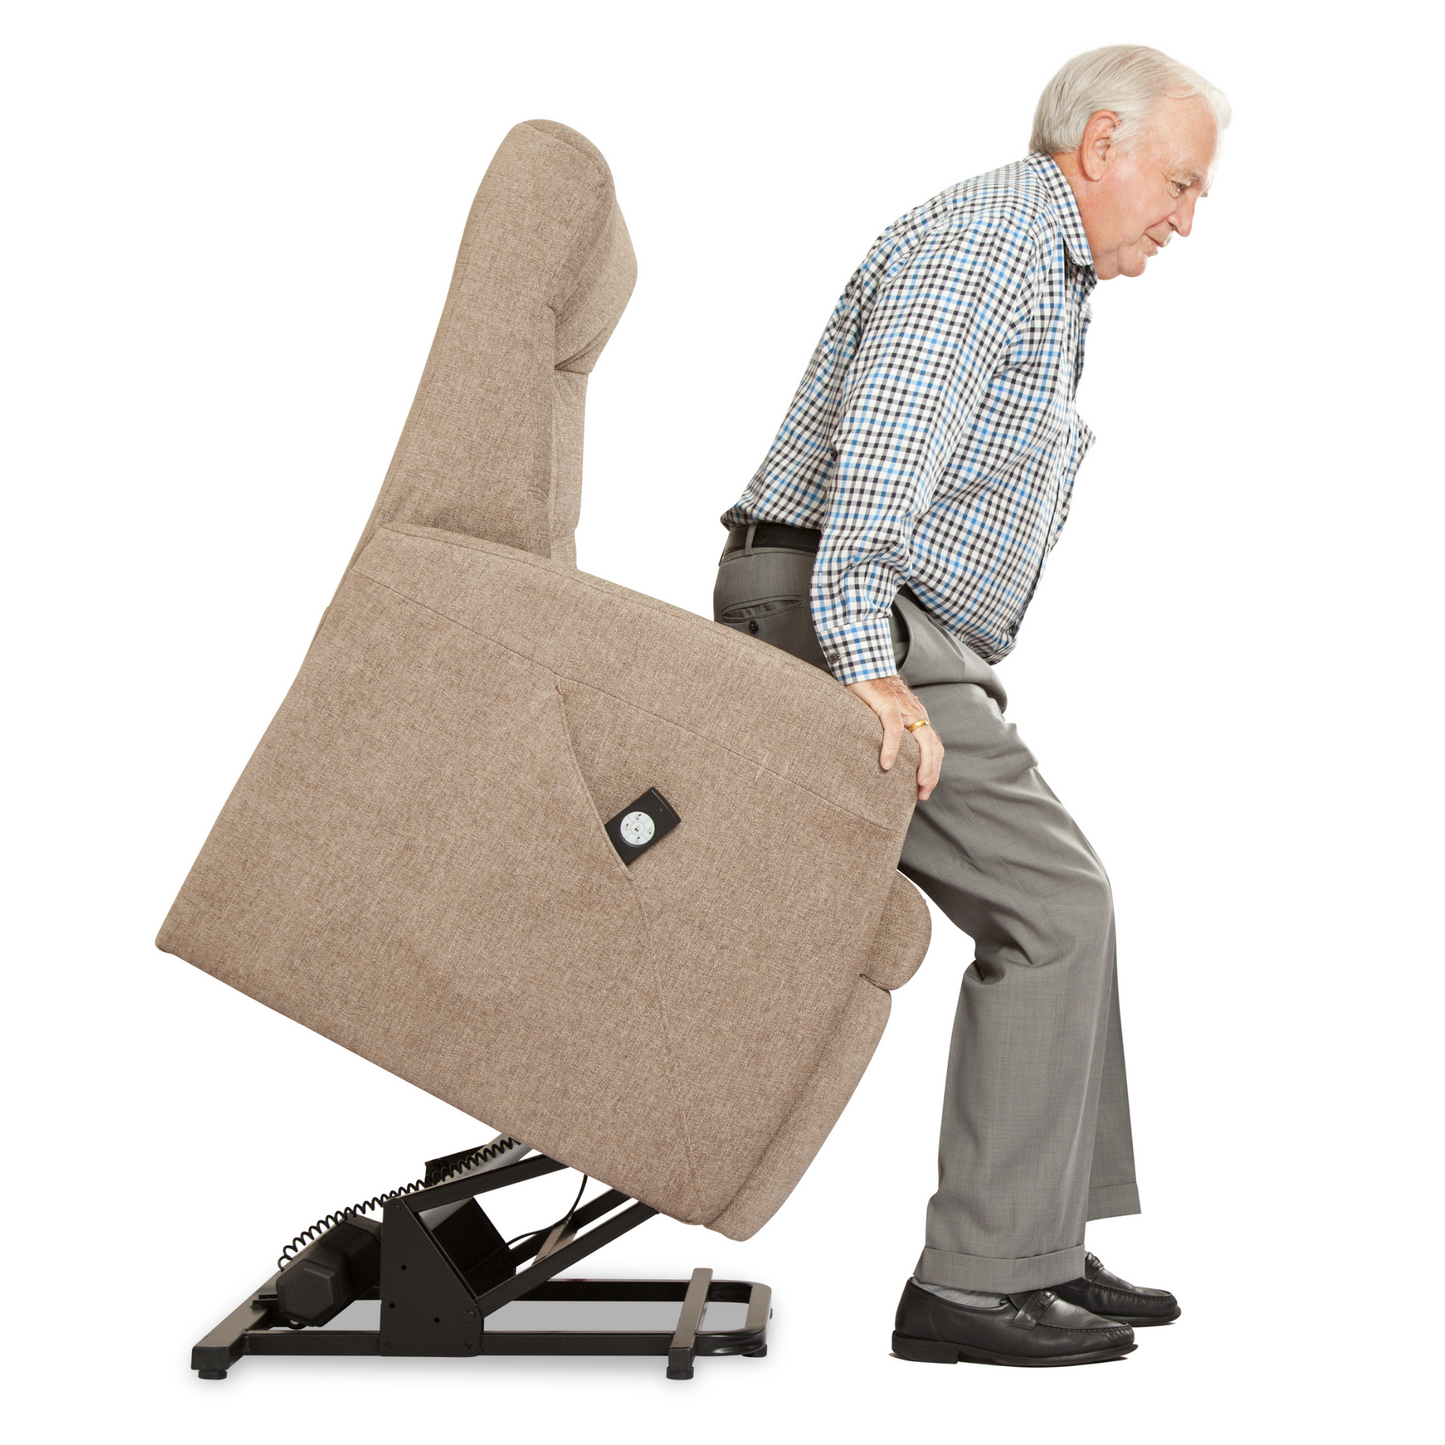 Silverstone Lift Chair by IMG